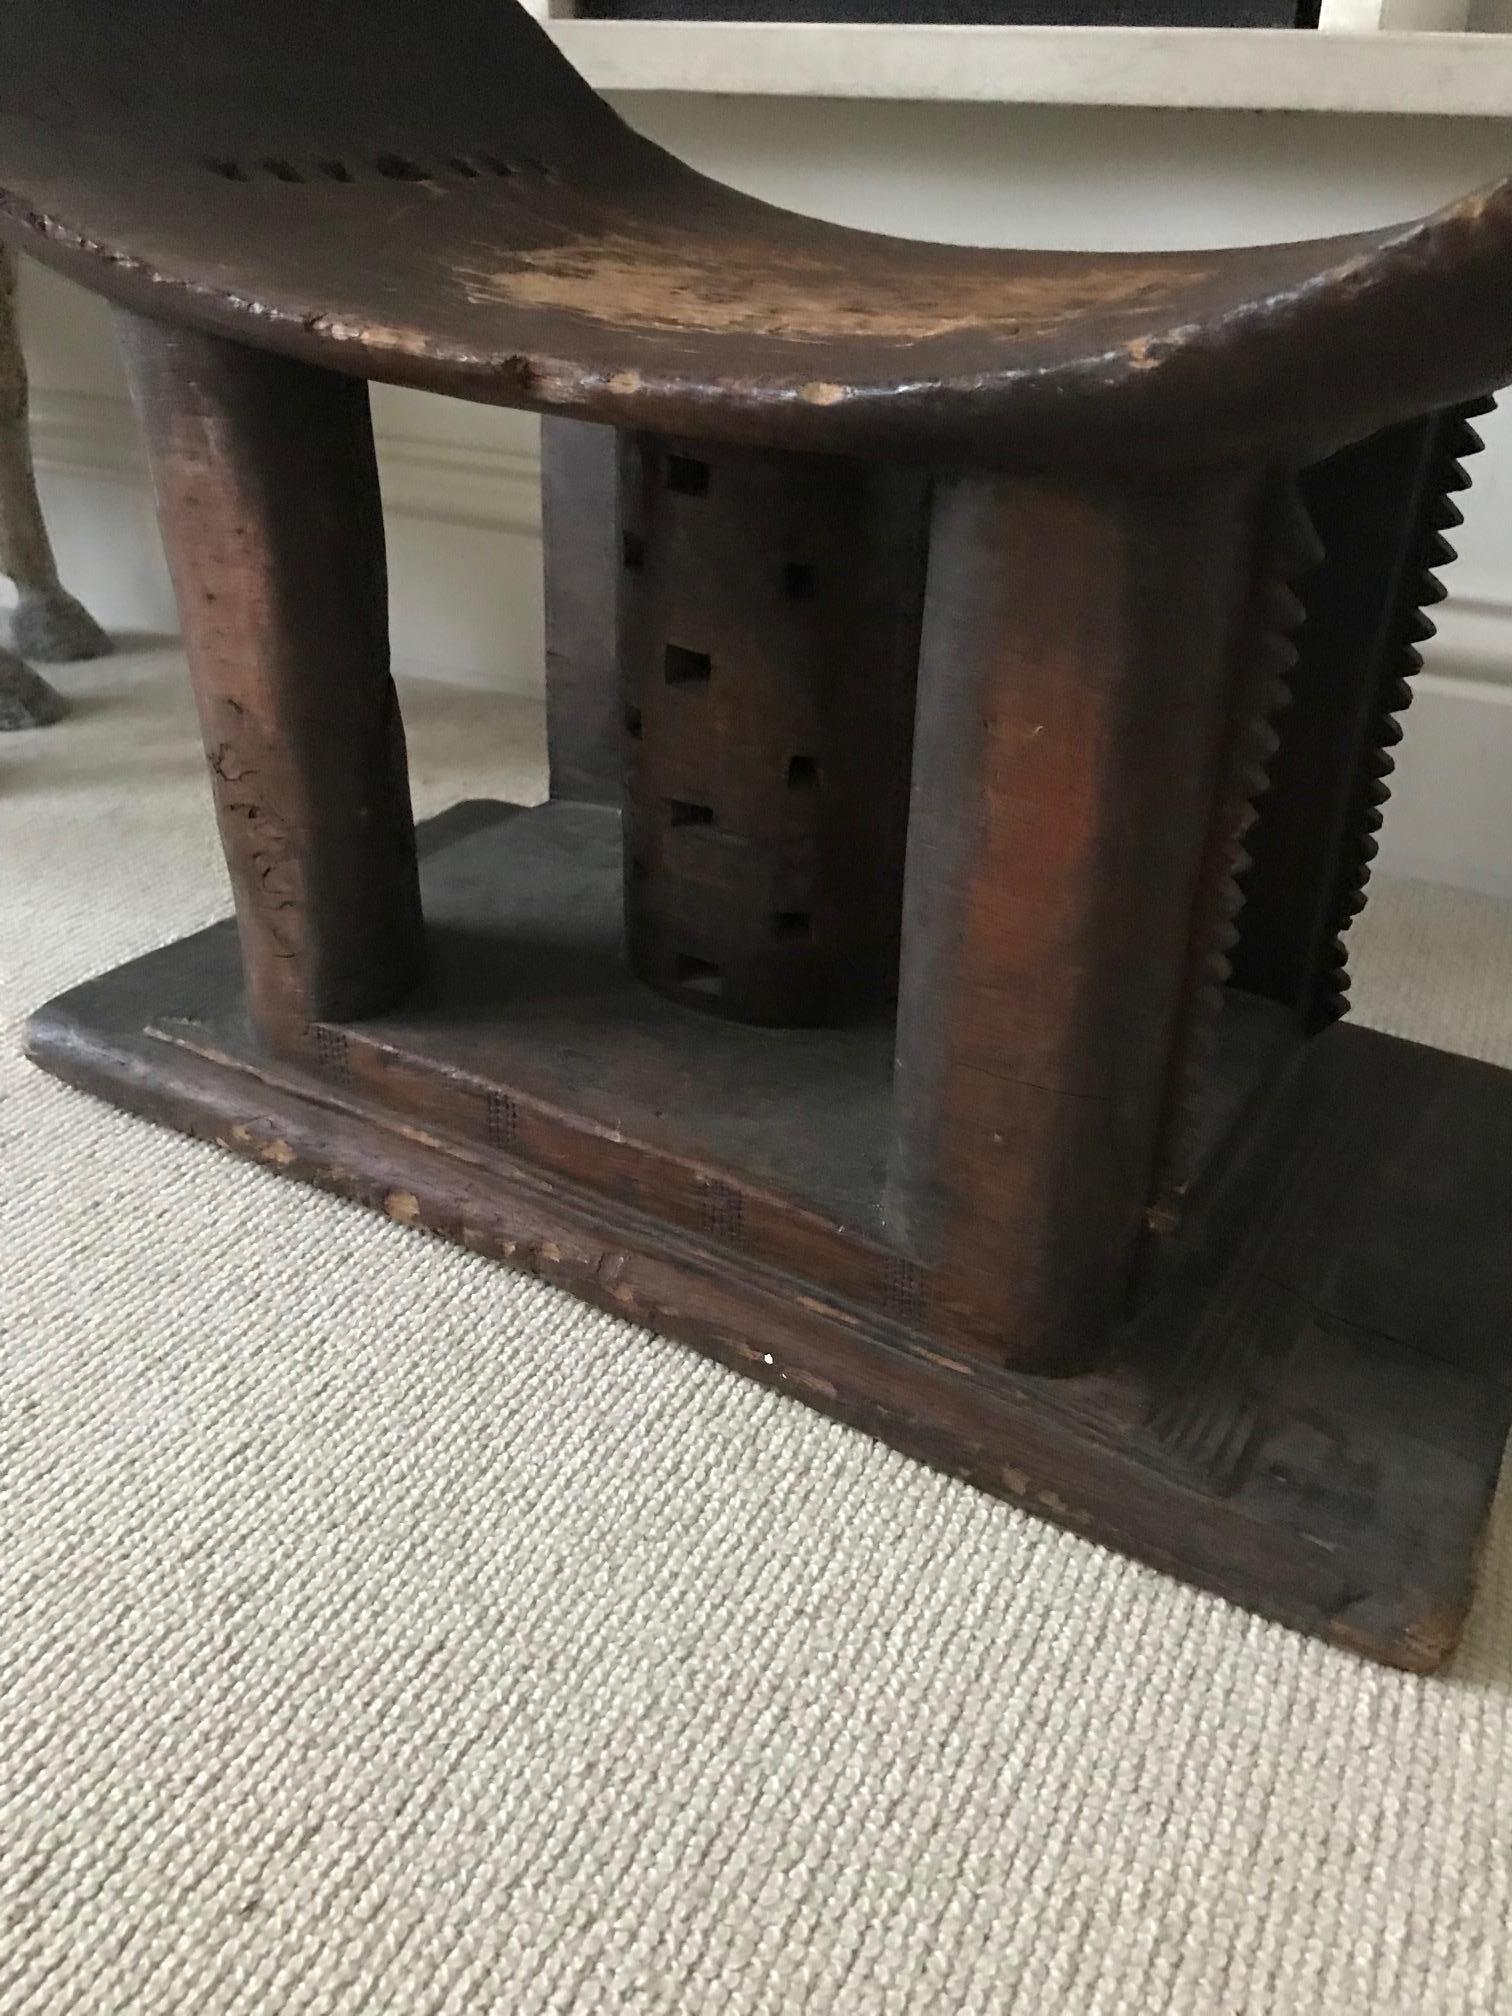 A large Ashanti stool from Ghana. Larger than average with good patination, signs of wear and tear and fine carving. Carved from one single piece of wood.